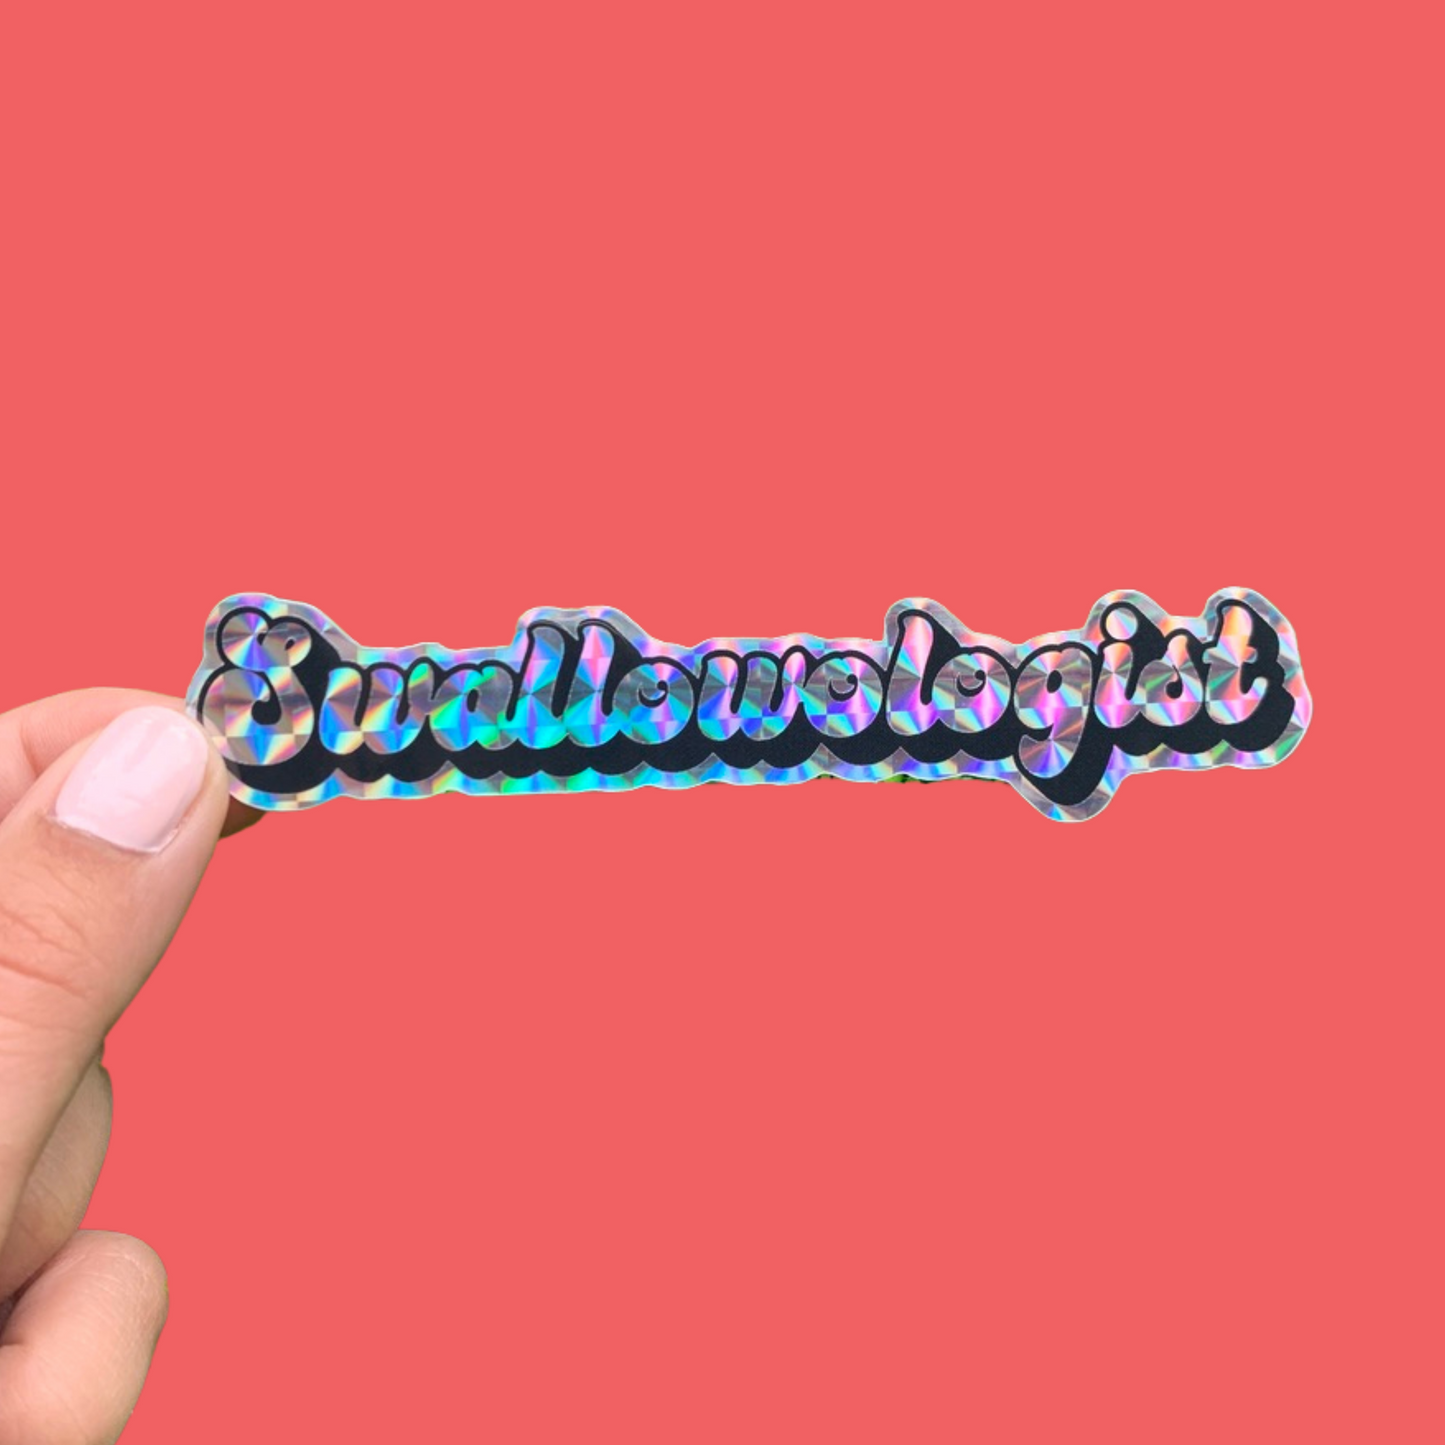 Load image into Gallery viewer, Swallowologist Holographic Sticker
